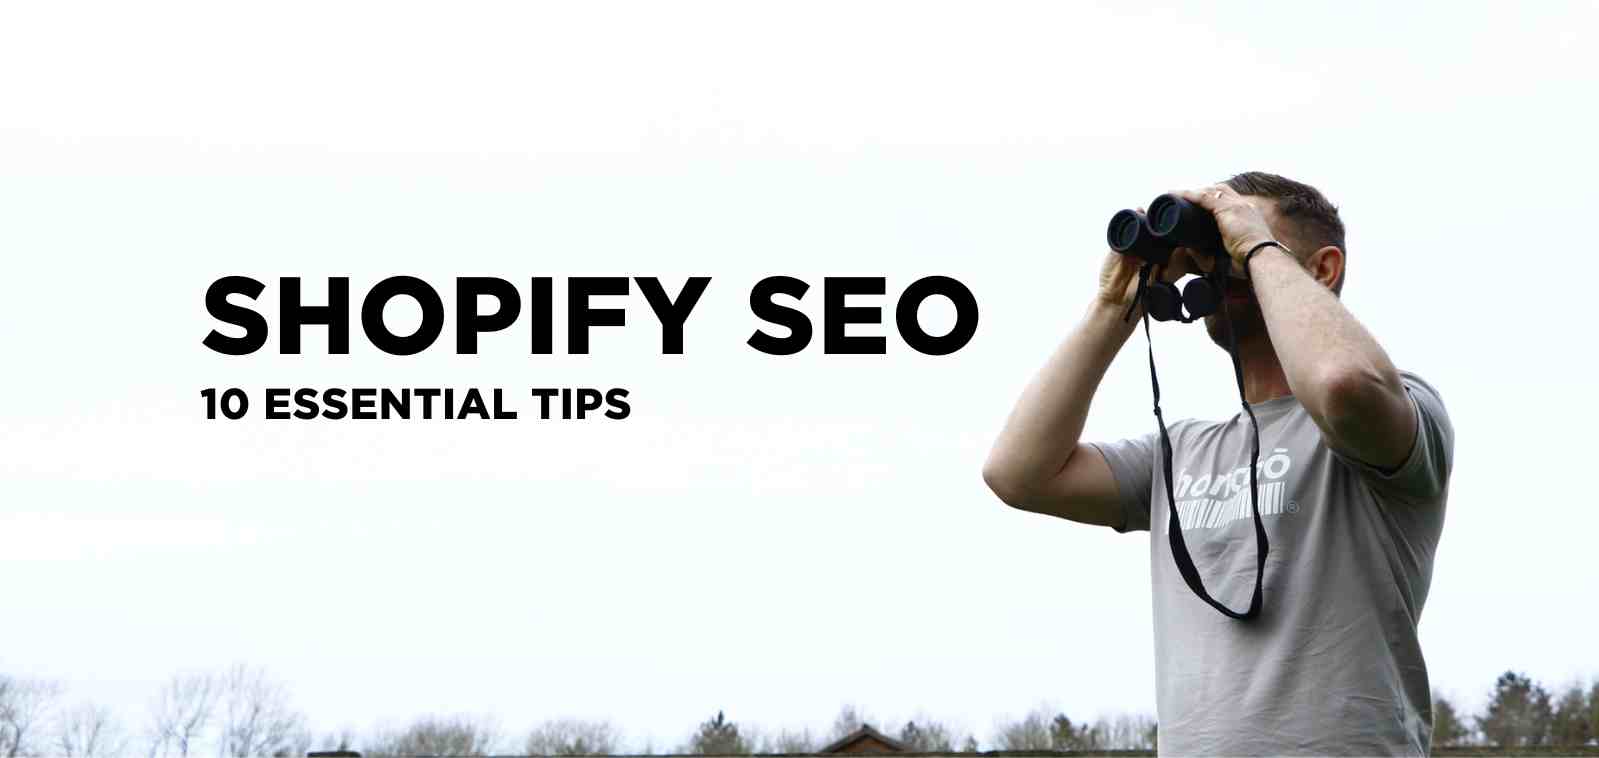 10 Essential Shopify SEO Tips for Boosting Your Online Visibility